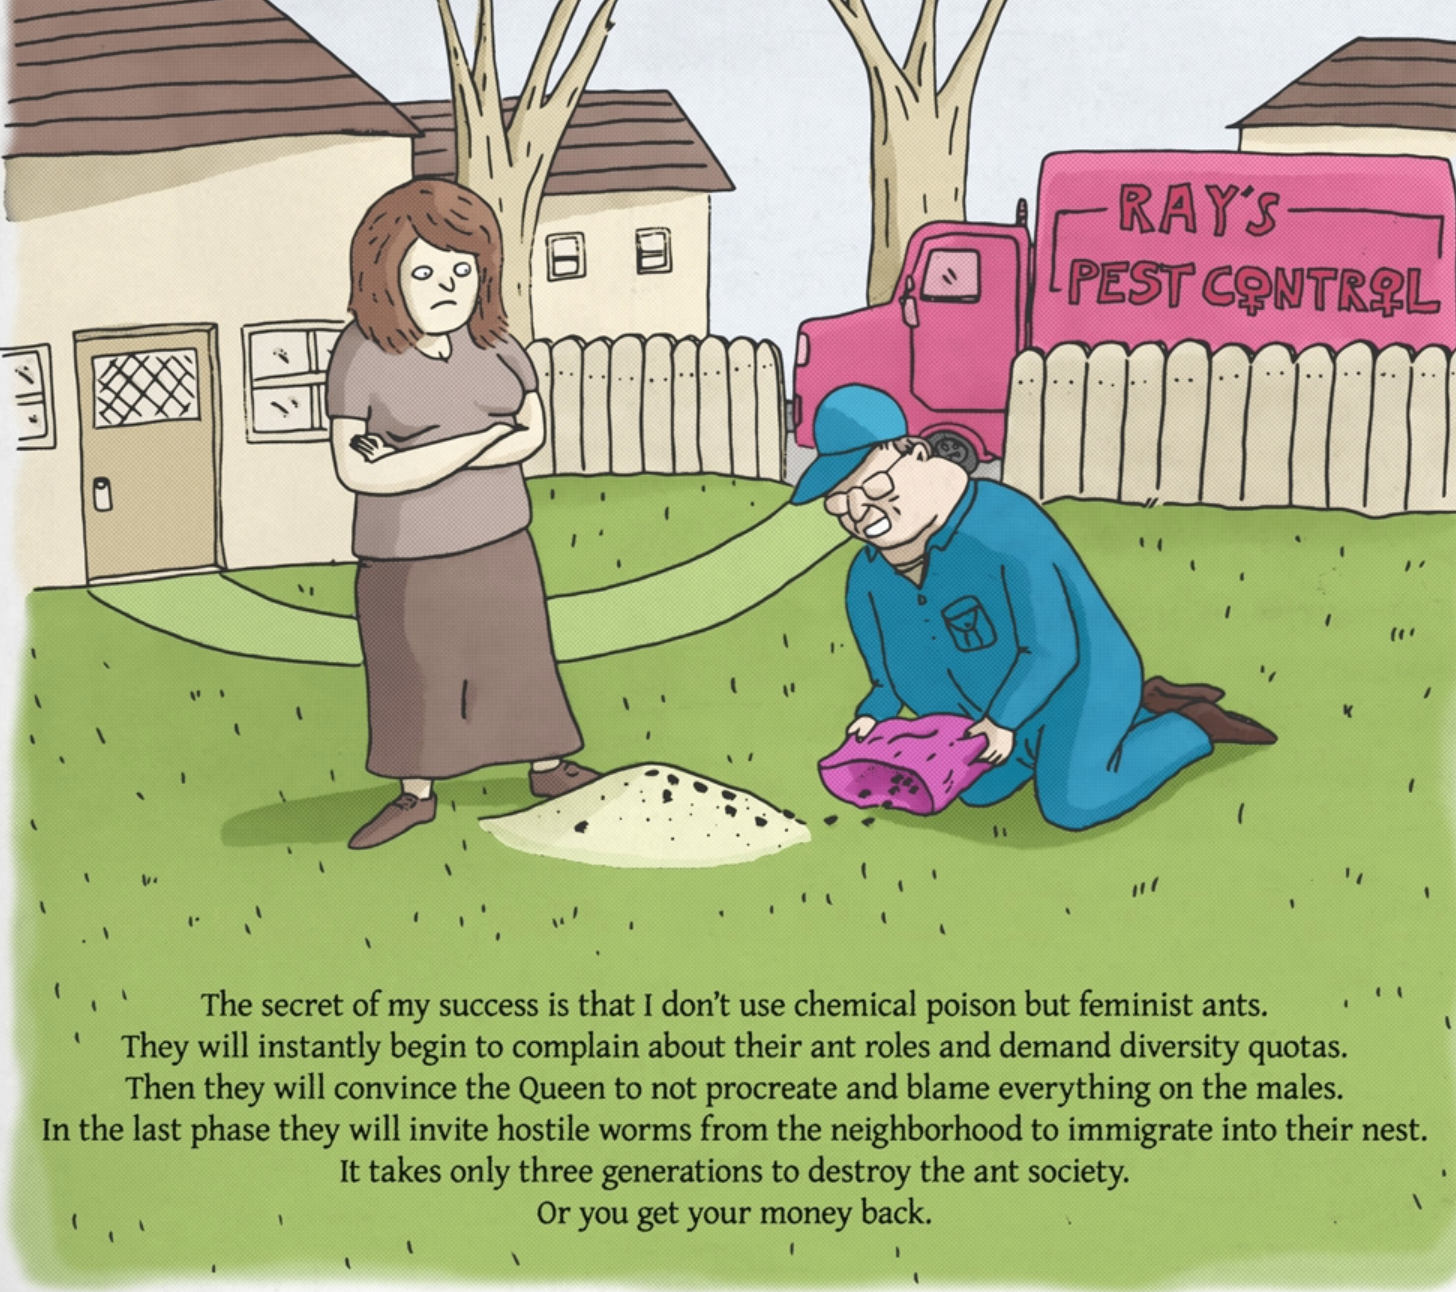 political meme feminist ants - Ray'S Lpest Control The secret of my success is that I don't use chemical poison but feminist ants. They will instantly begin to complain about their ant roles and demand diversity quotas. Then they will convince the Queen t